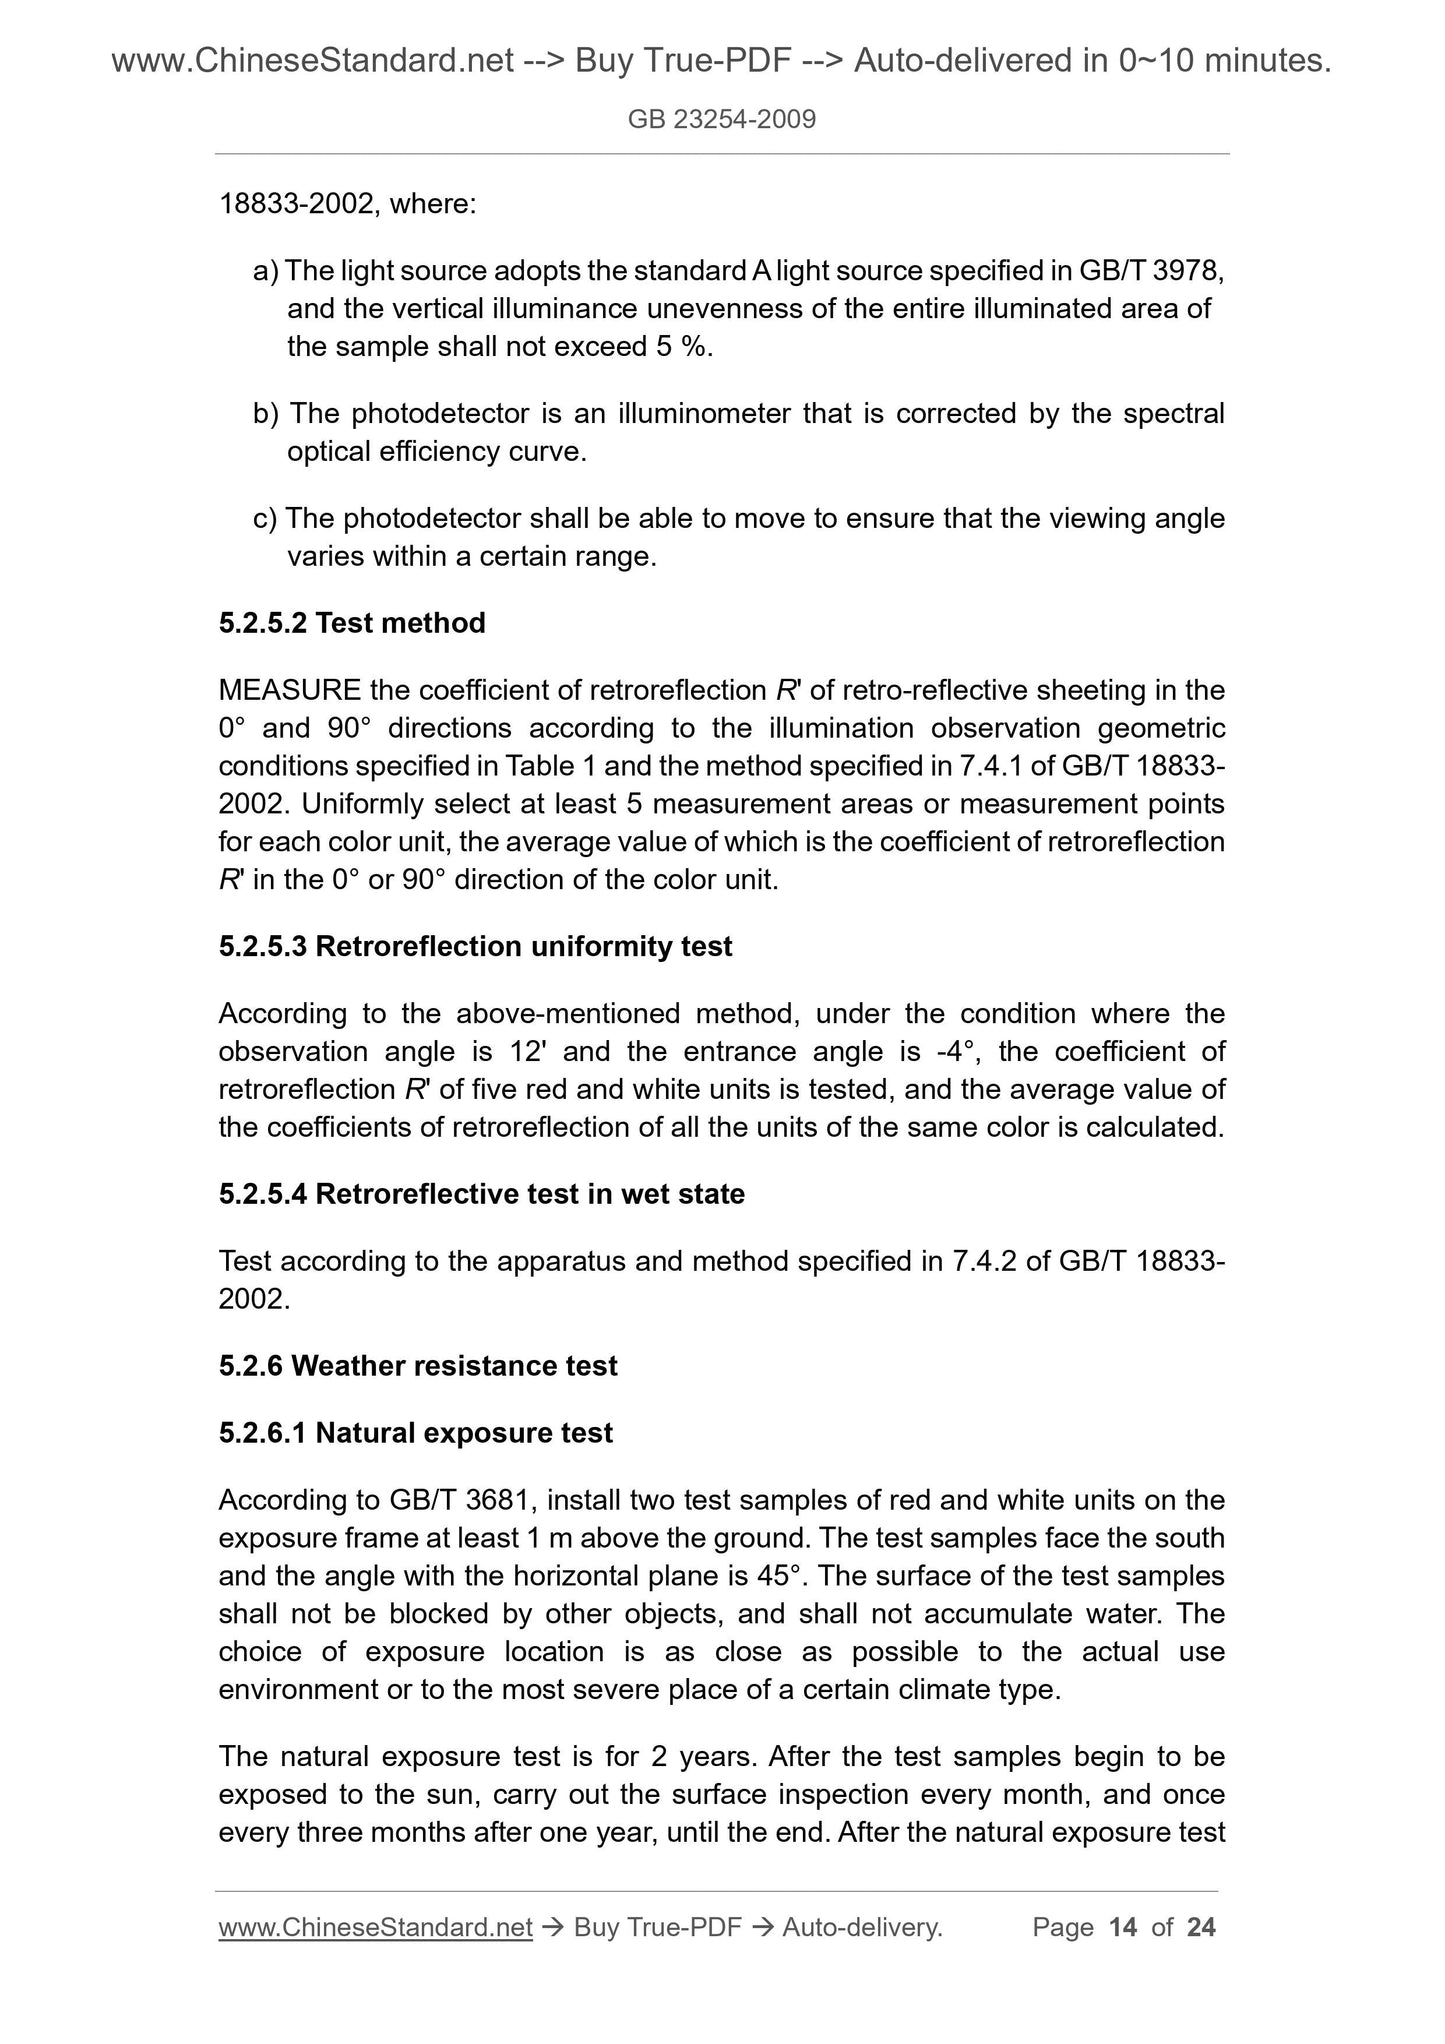 GB 23254-2009 Page 8